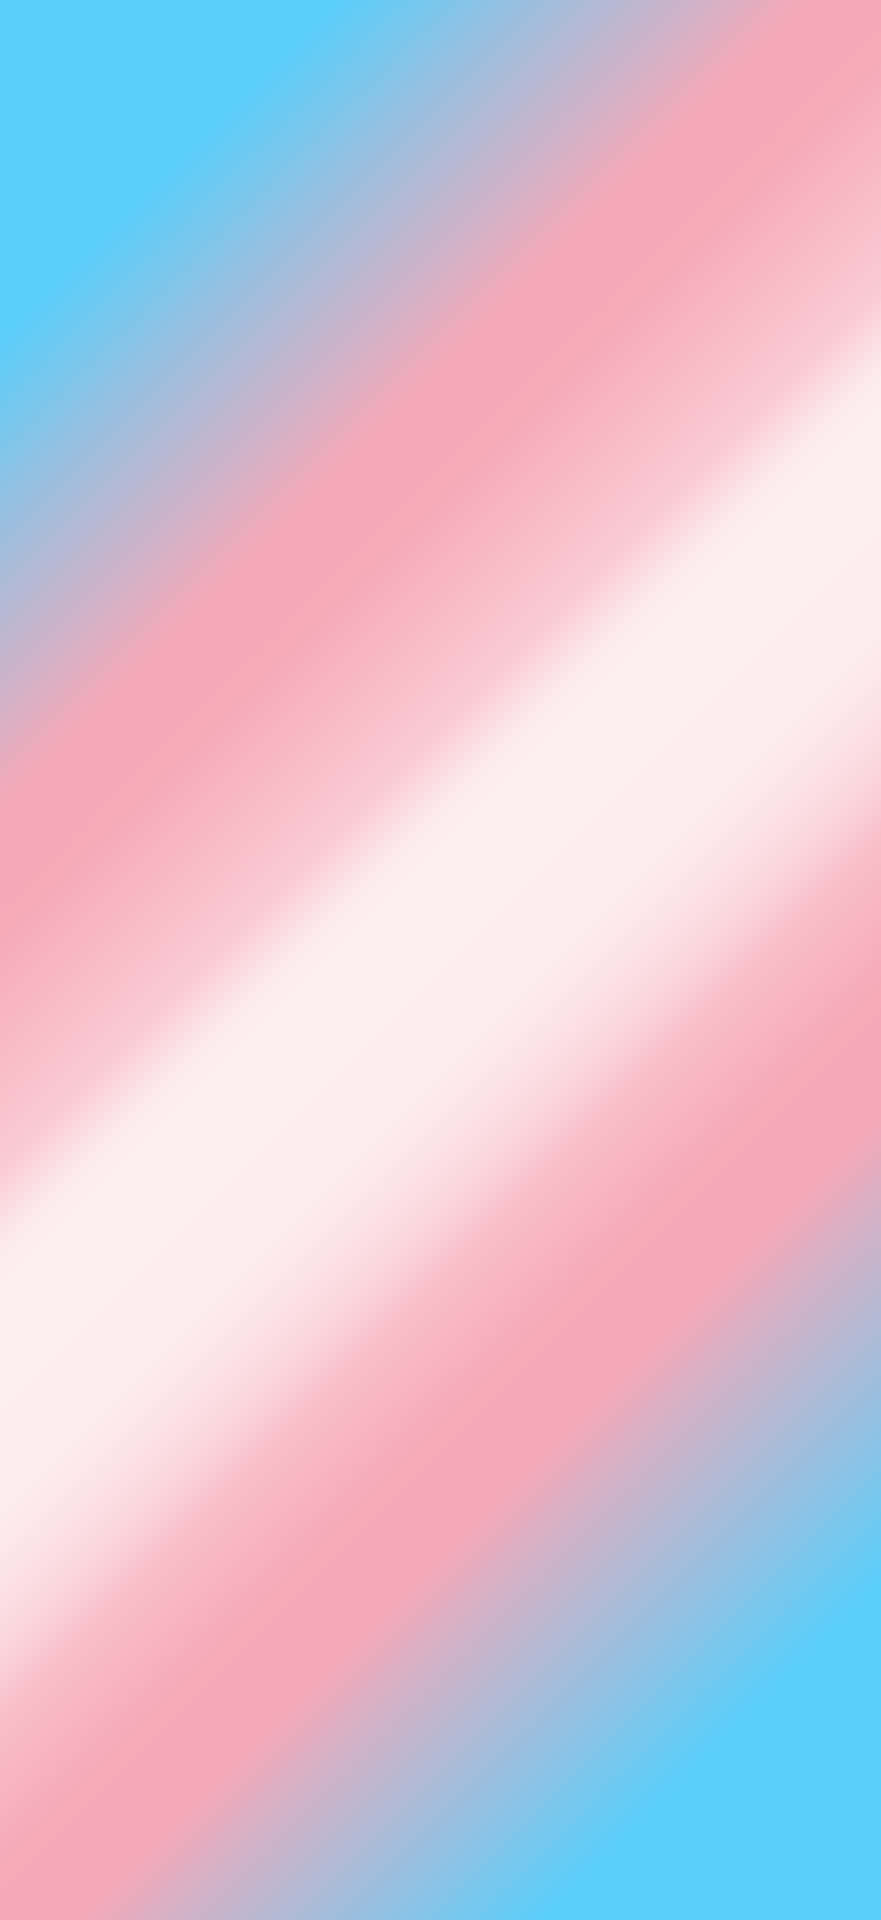 A Pink And Blue Gradient Background Wallpaper